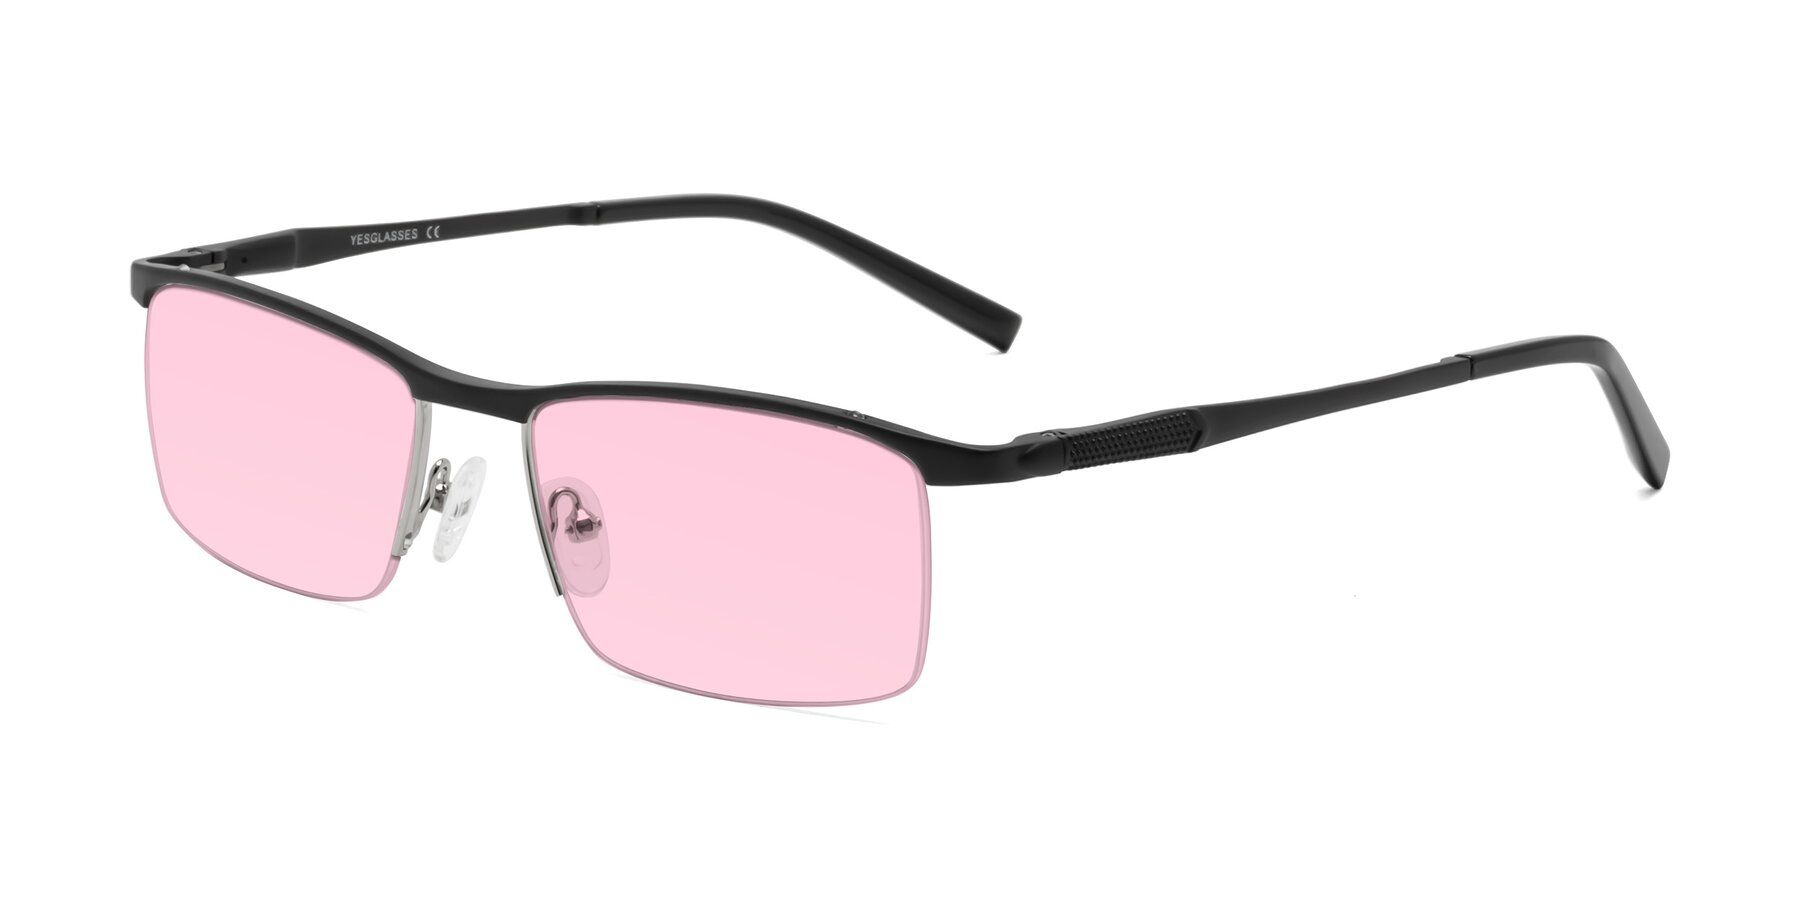 Angle of CX6303 in Black with Light Pink Tinted Lenses